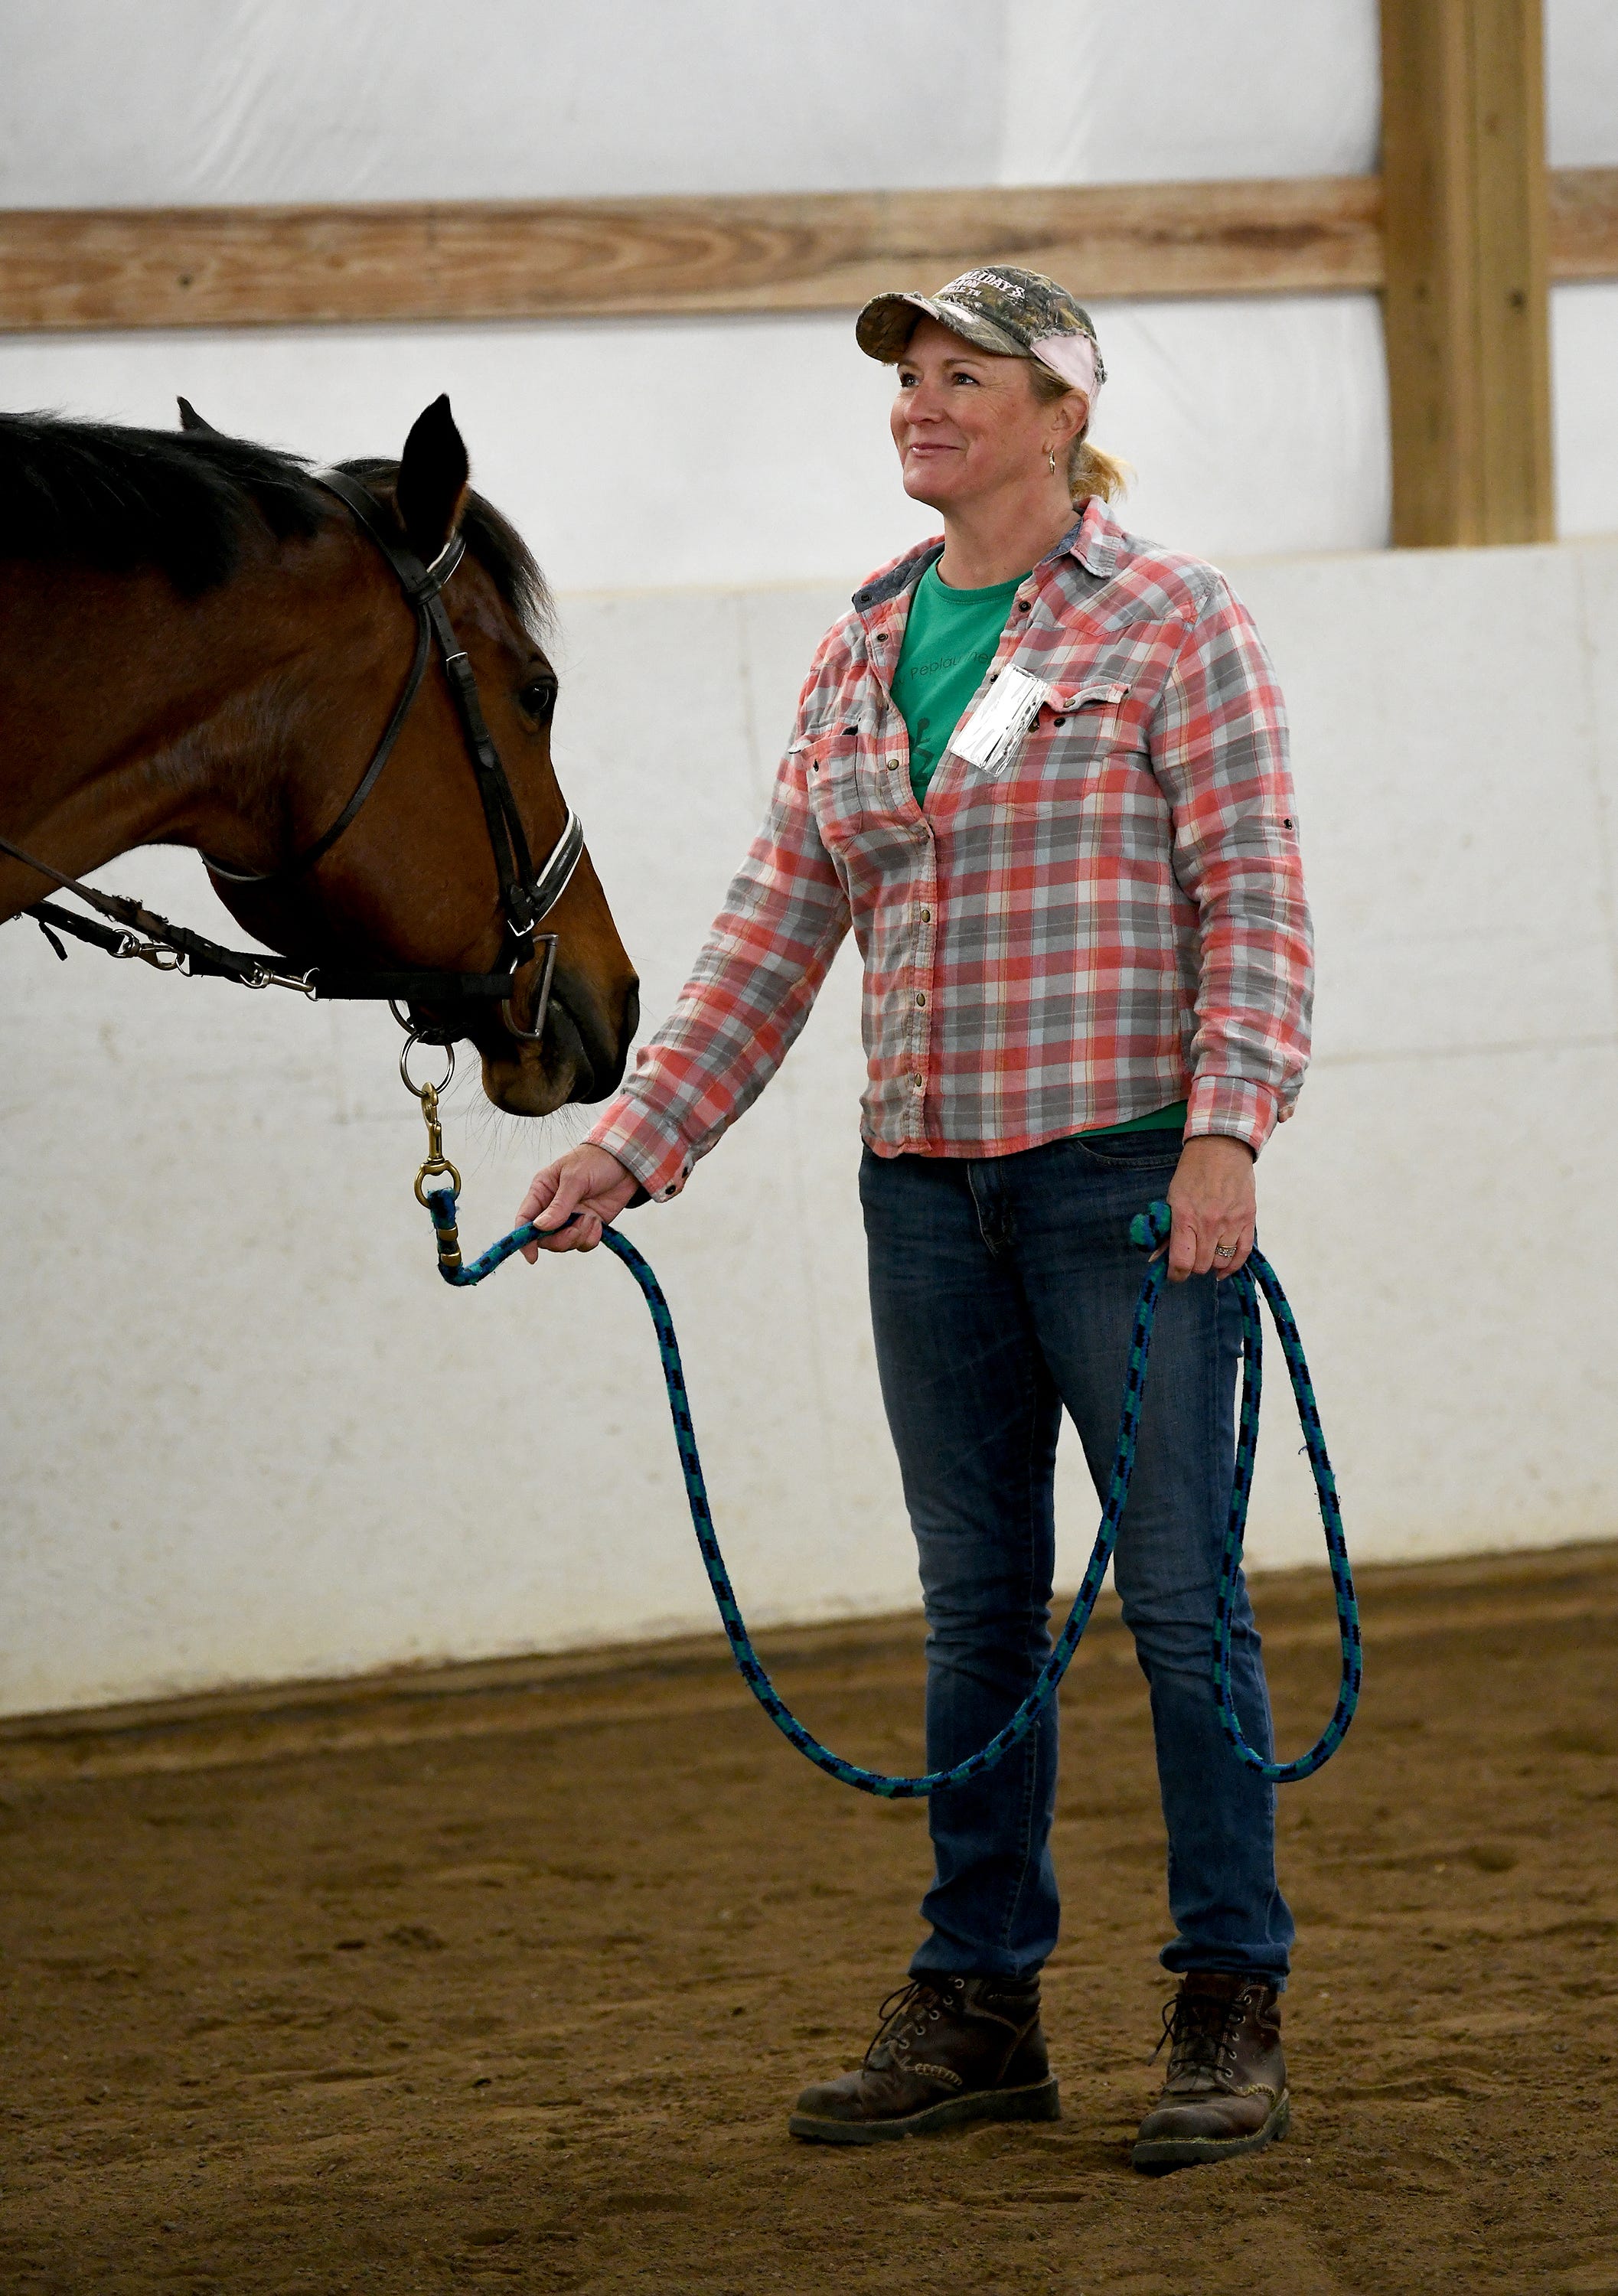 Volunteer Angela Bonnell, helps out with the horse B. Smiley, during the Tuesday morning riding session at Therapeutic Riding Inc. in Ann Arbor.